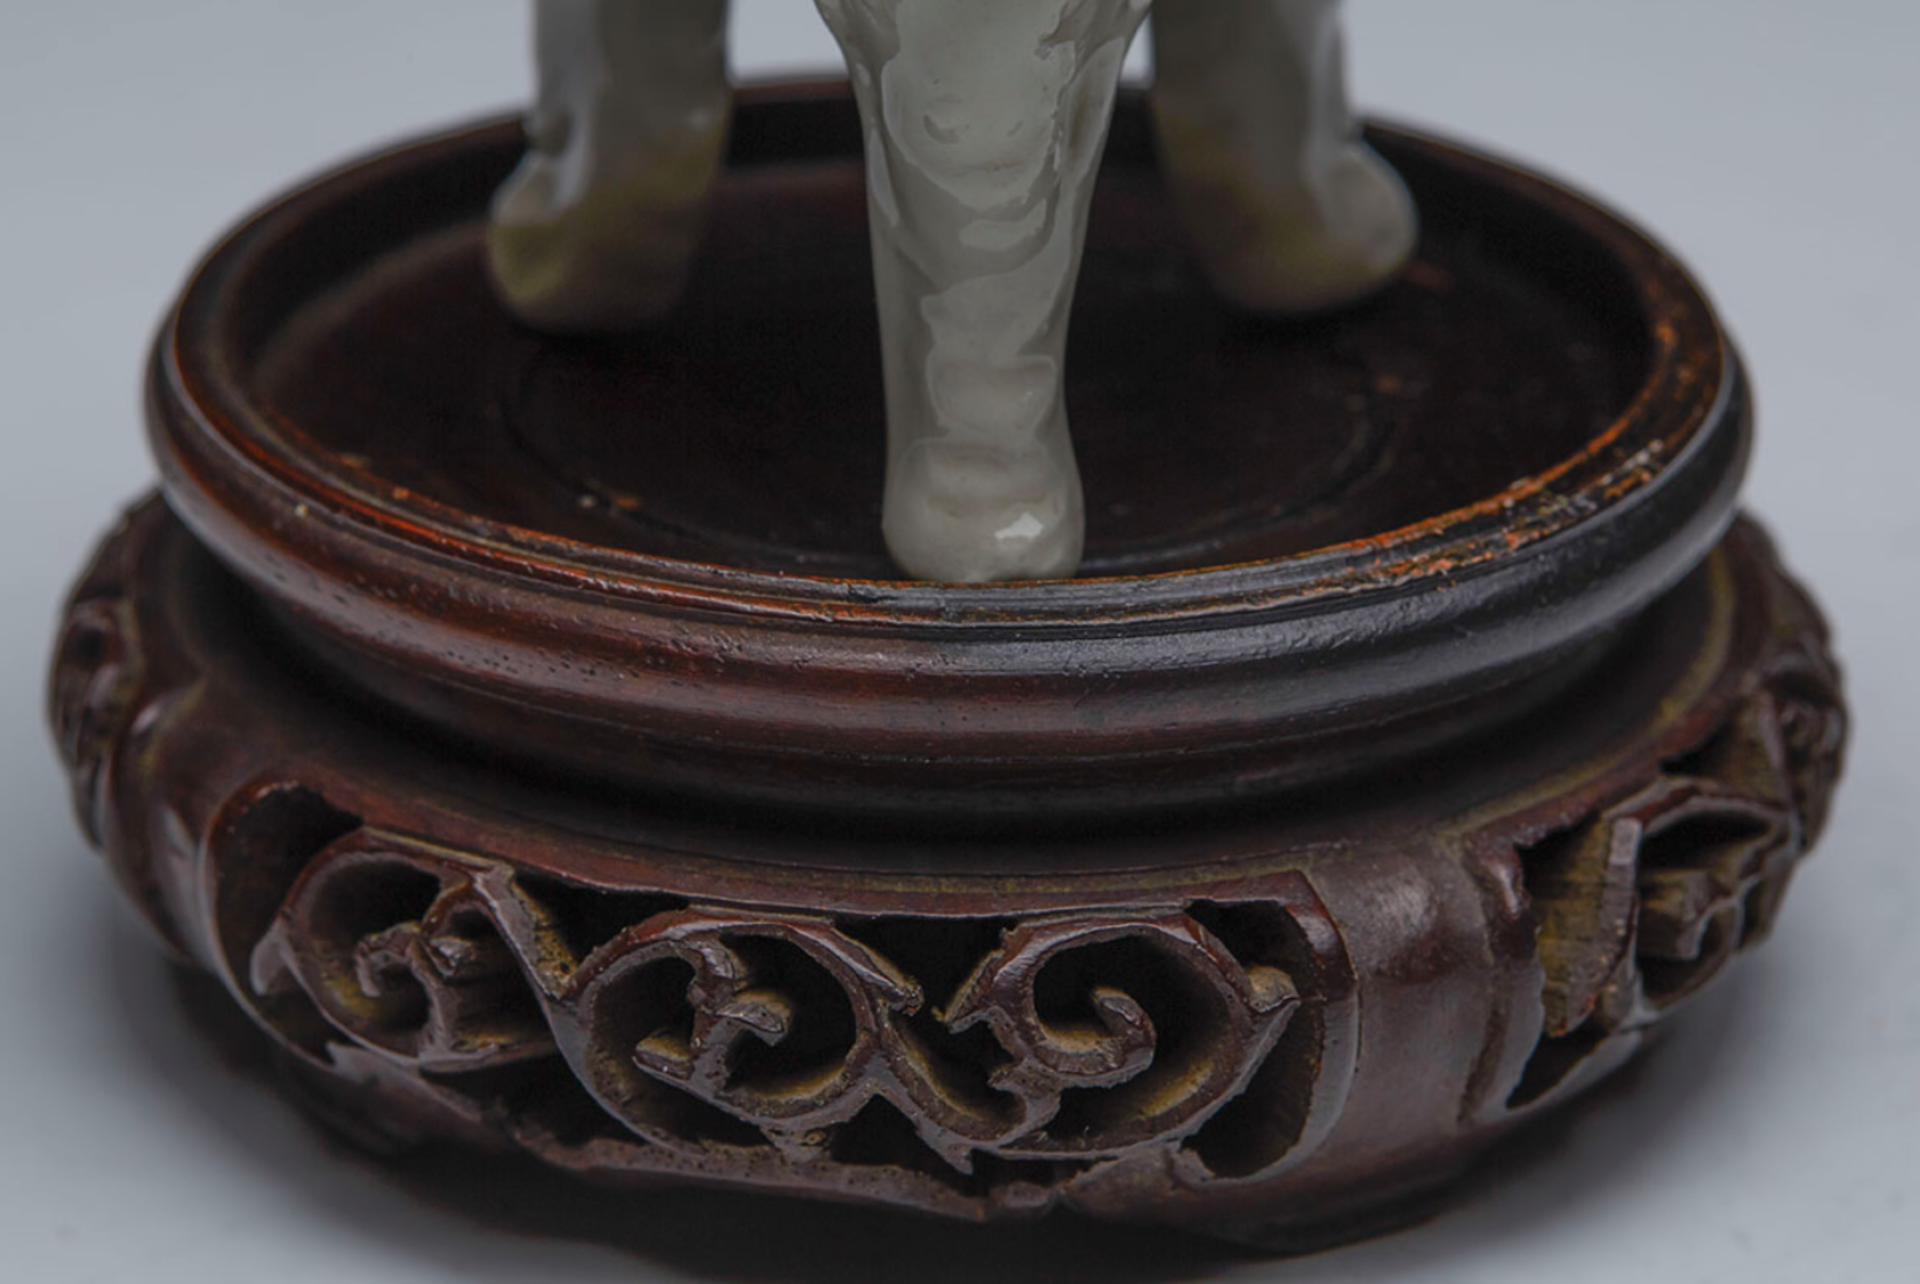 Antique Chinese Dehua Tripod Censer 19Th C Or Earlier - Image 9 of 11